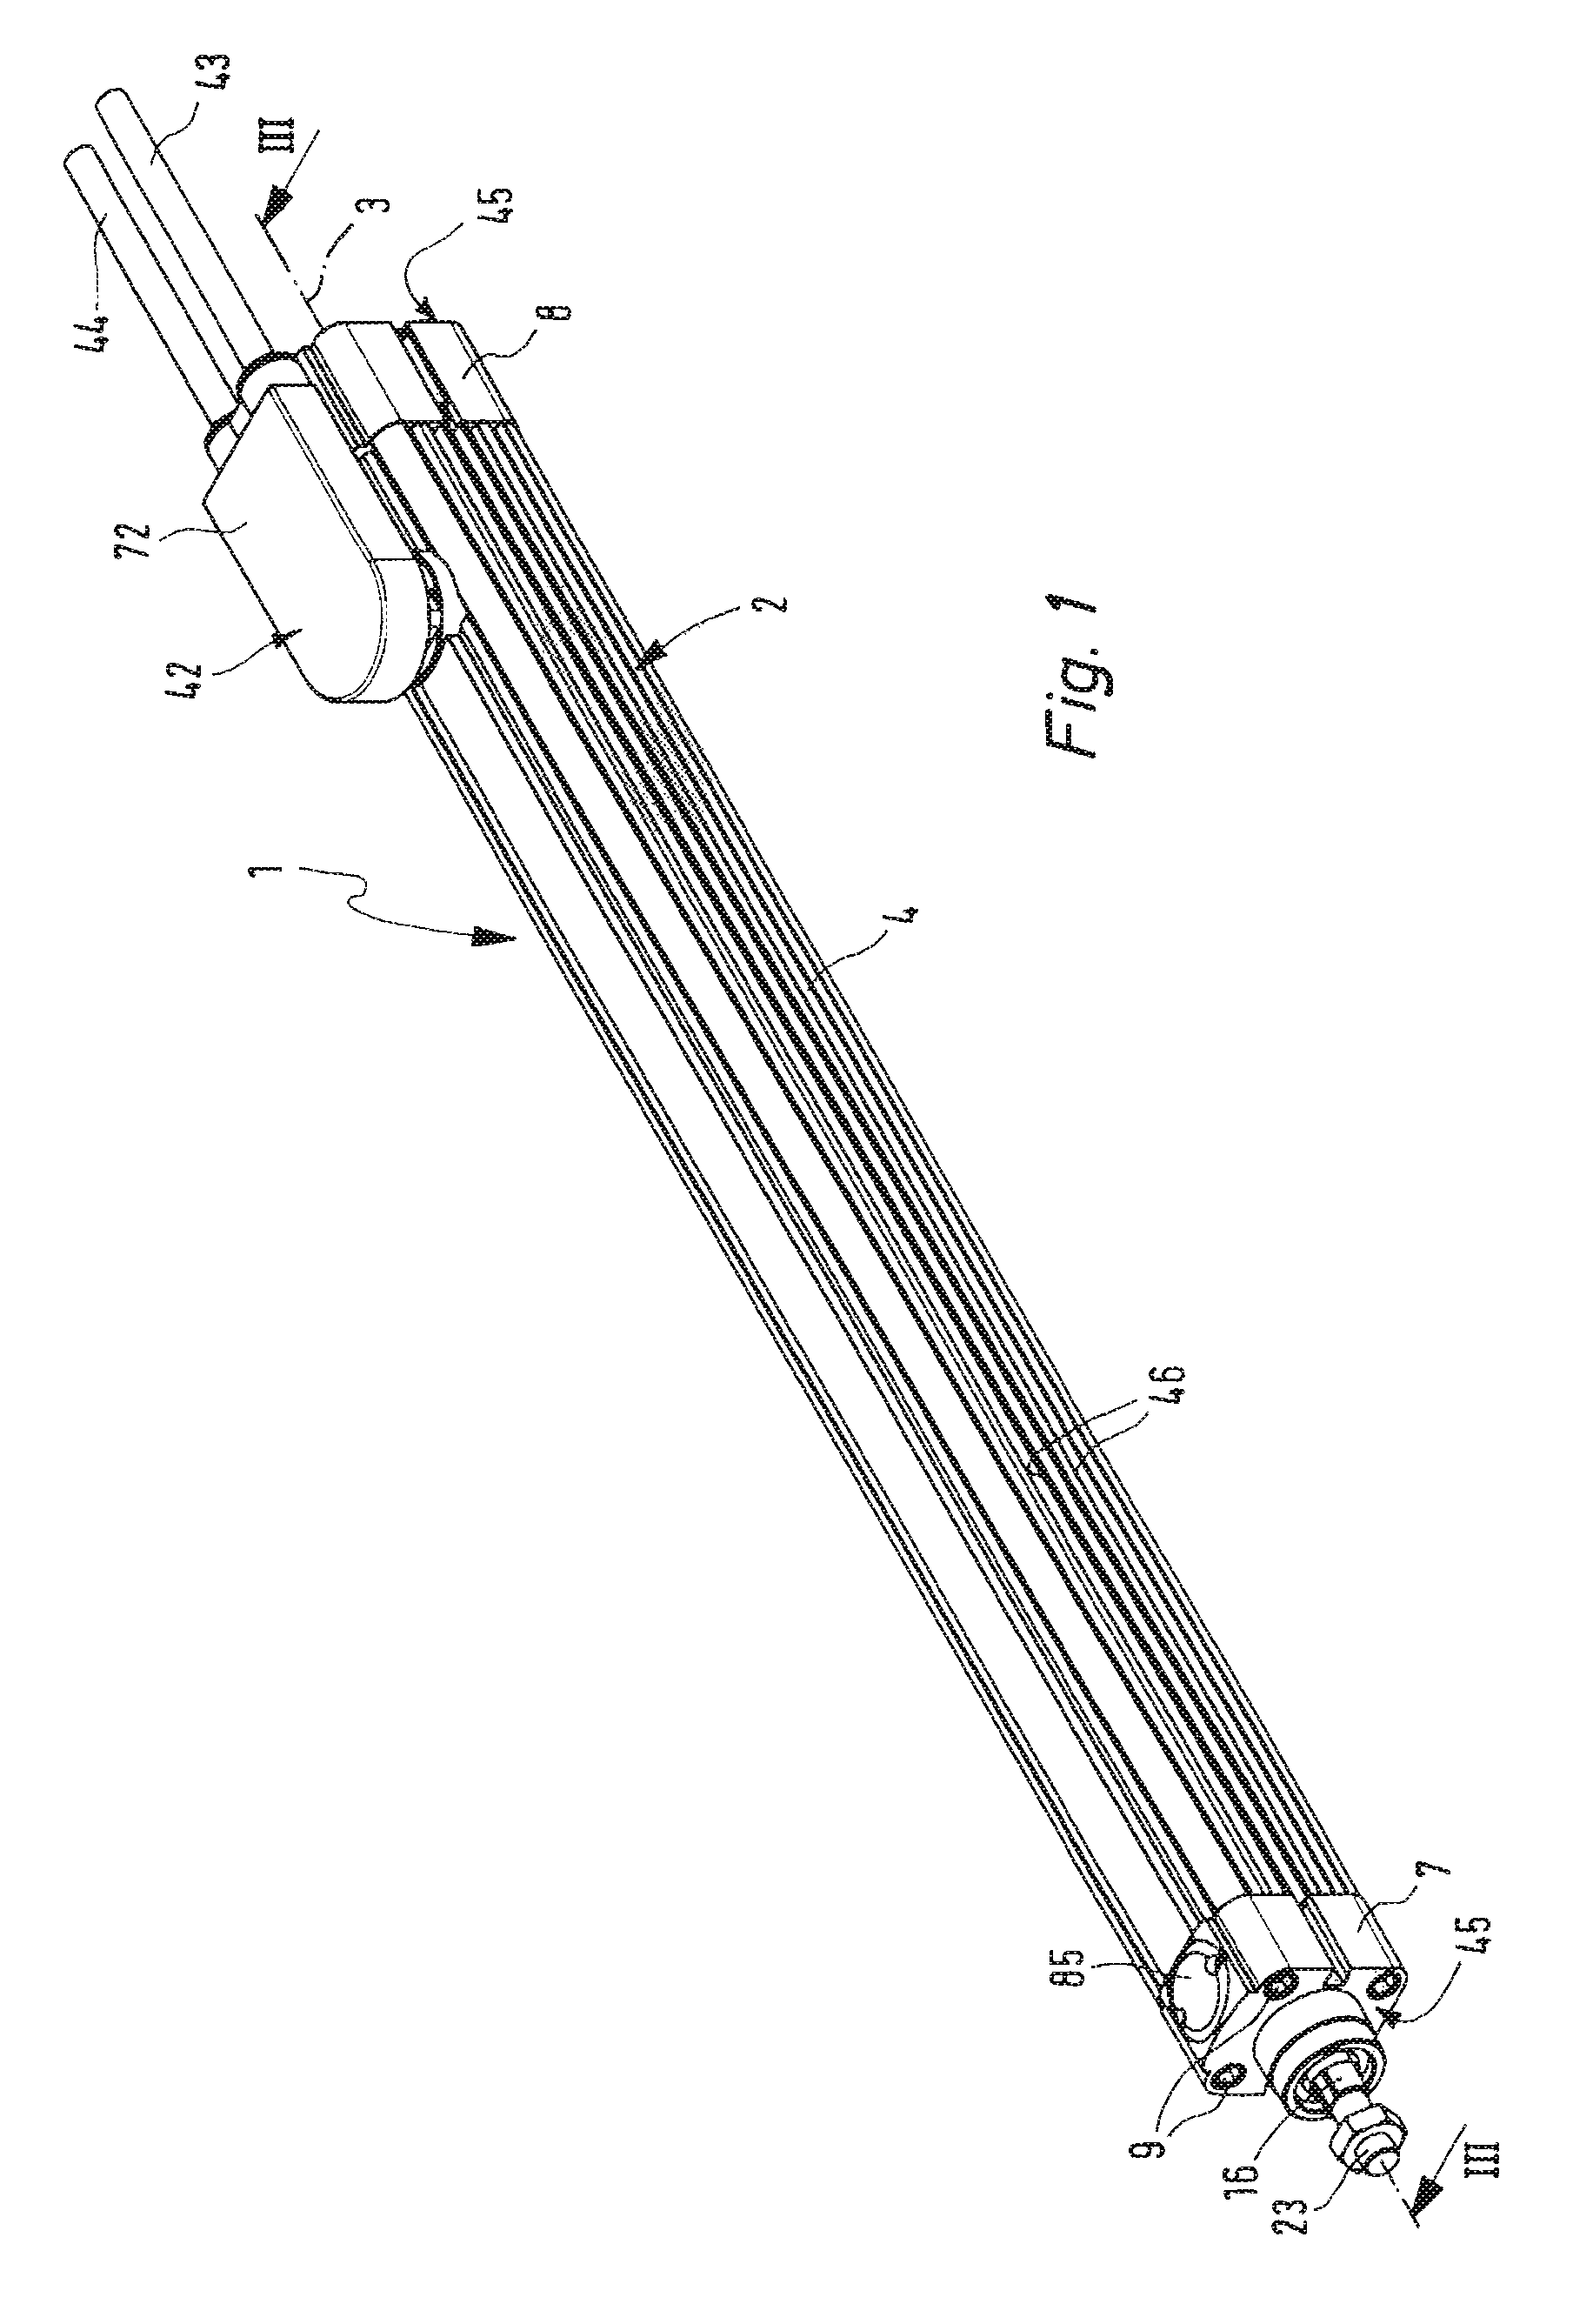 Electrical linear drive